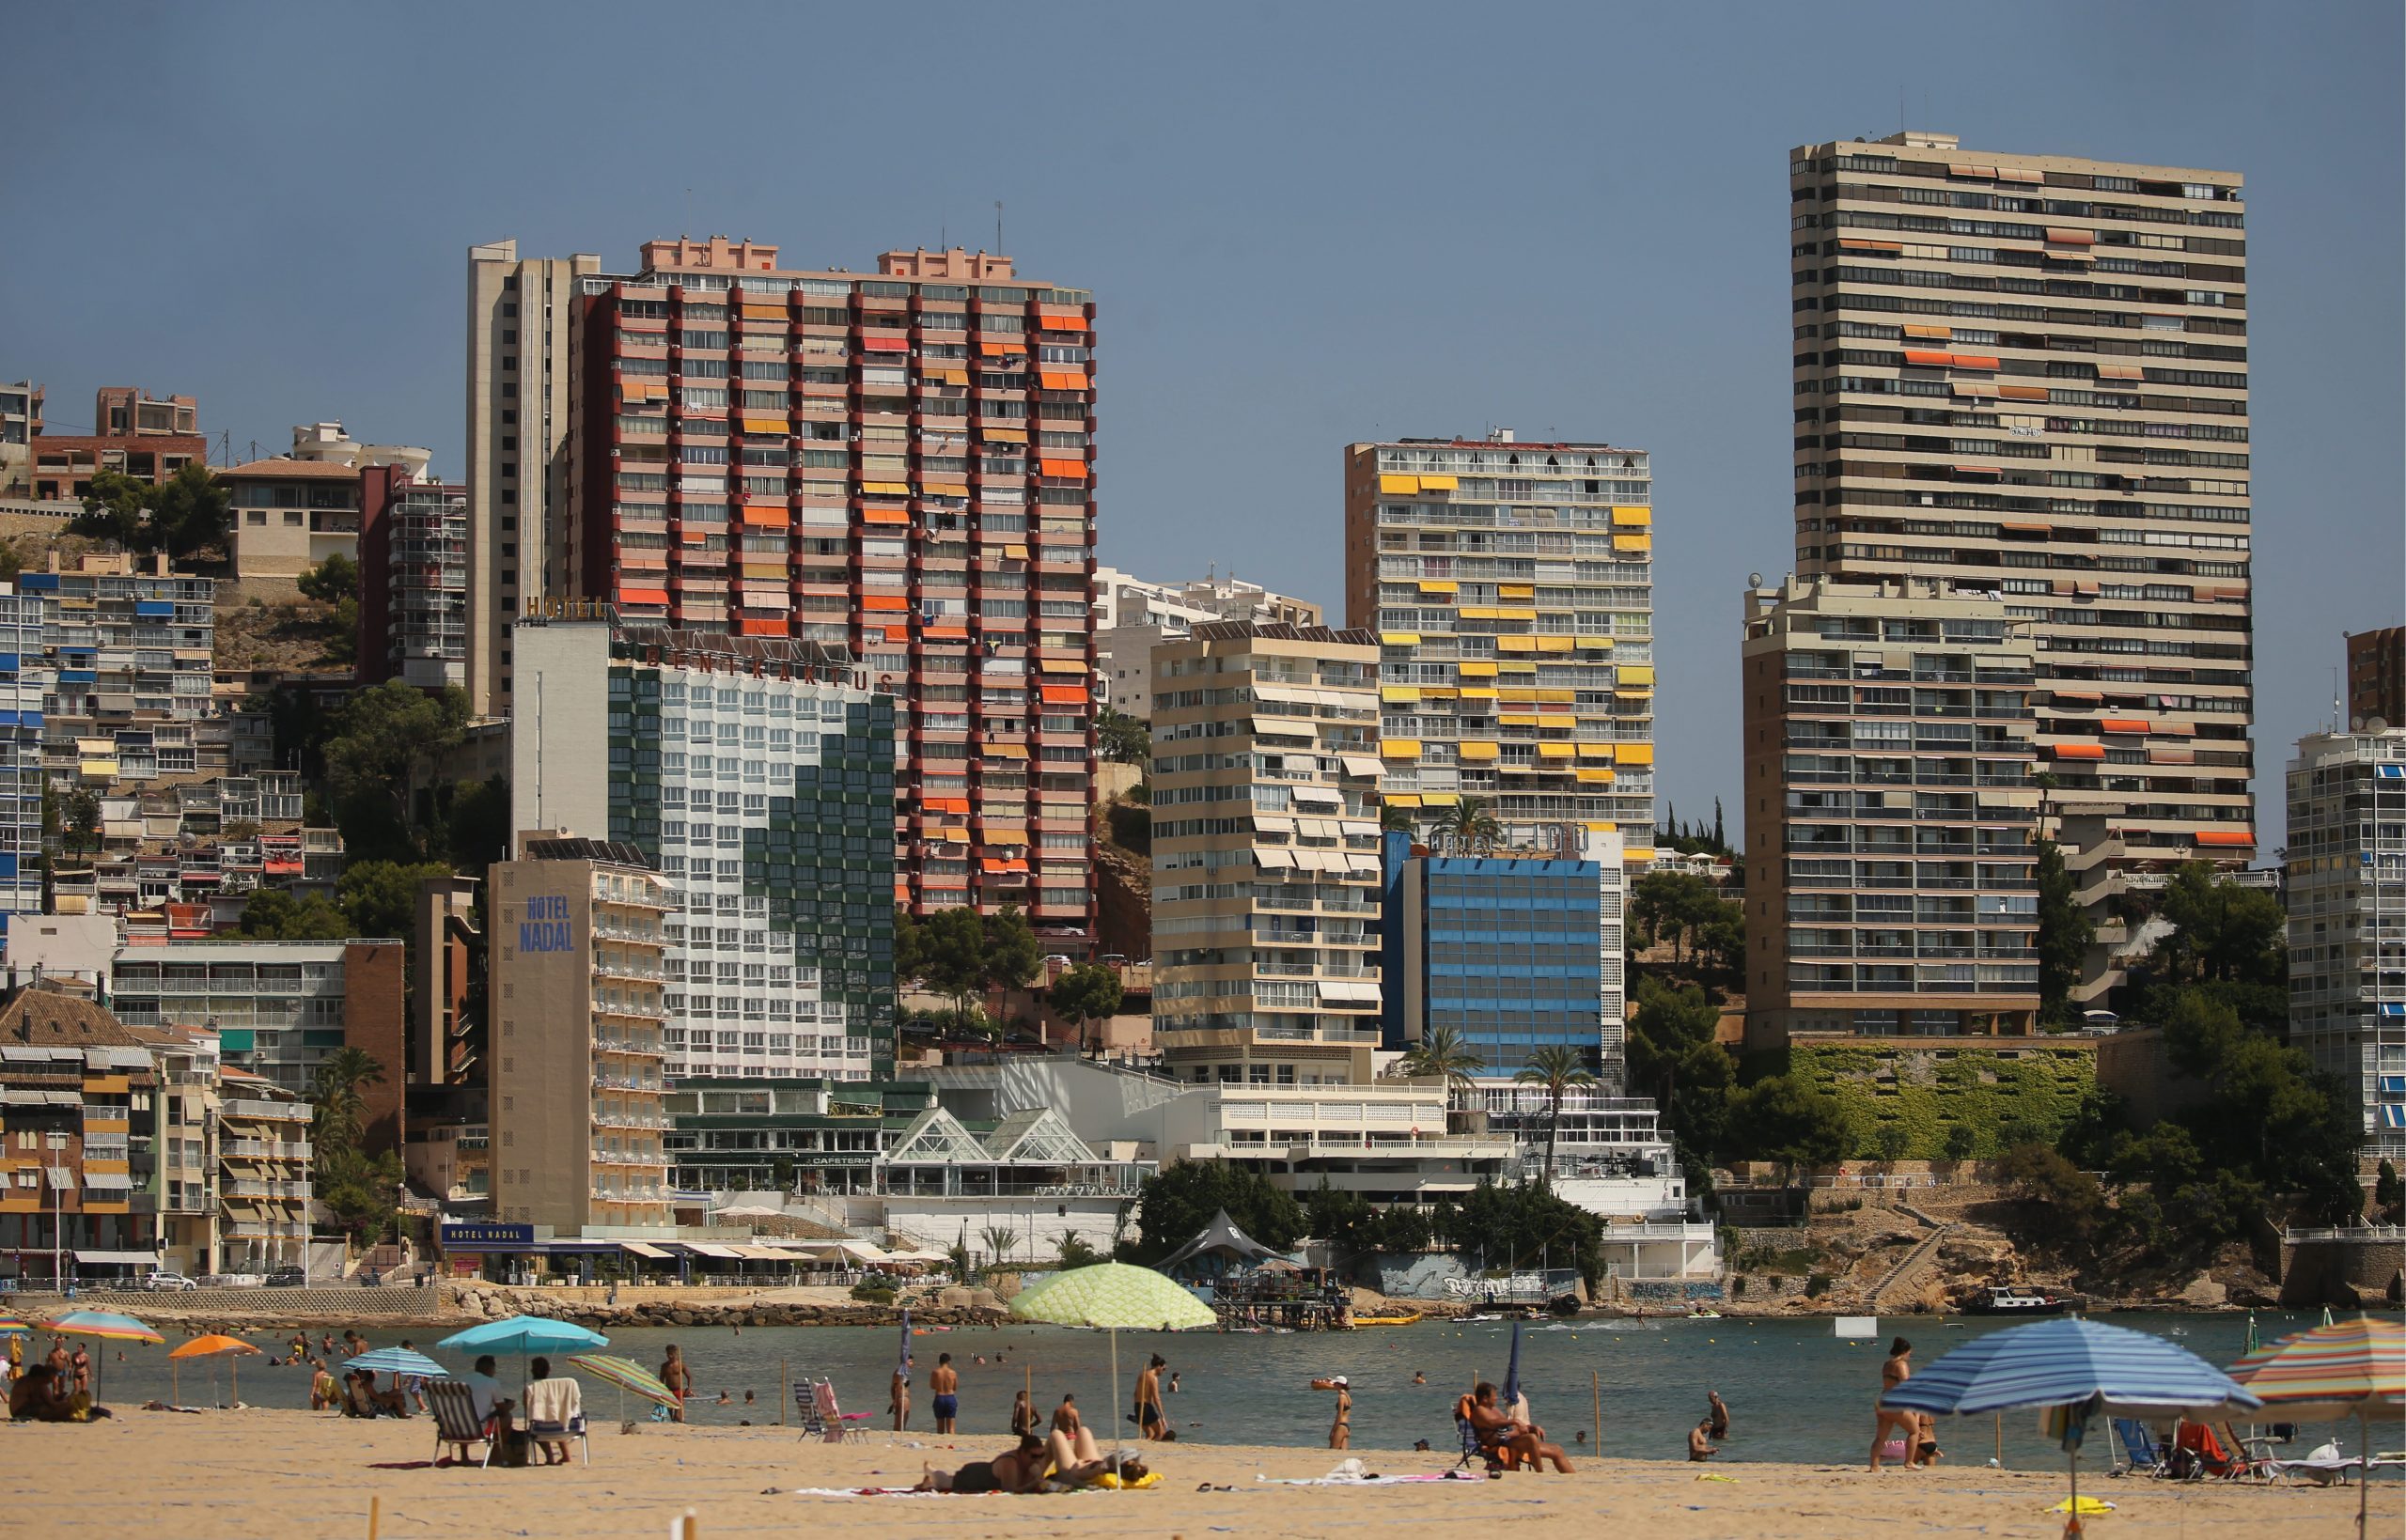 British tourists in Spain are increasingly booking all-inclusive stays in areas like Benidorm due to inflation - in bad news for local restaurants and bars British tourists in Spain are increasingly booking all-inclusive stays in areas like Benidorm due to inflation - in bad news for local restaurants and bars